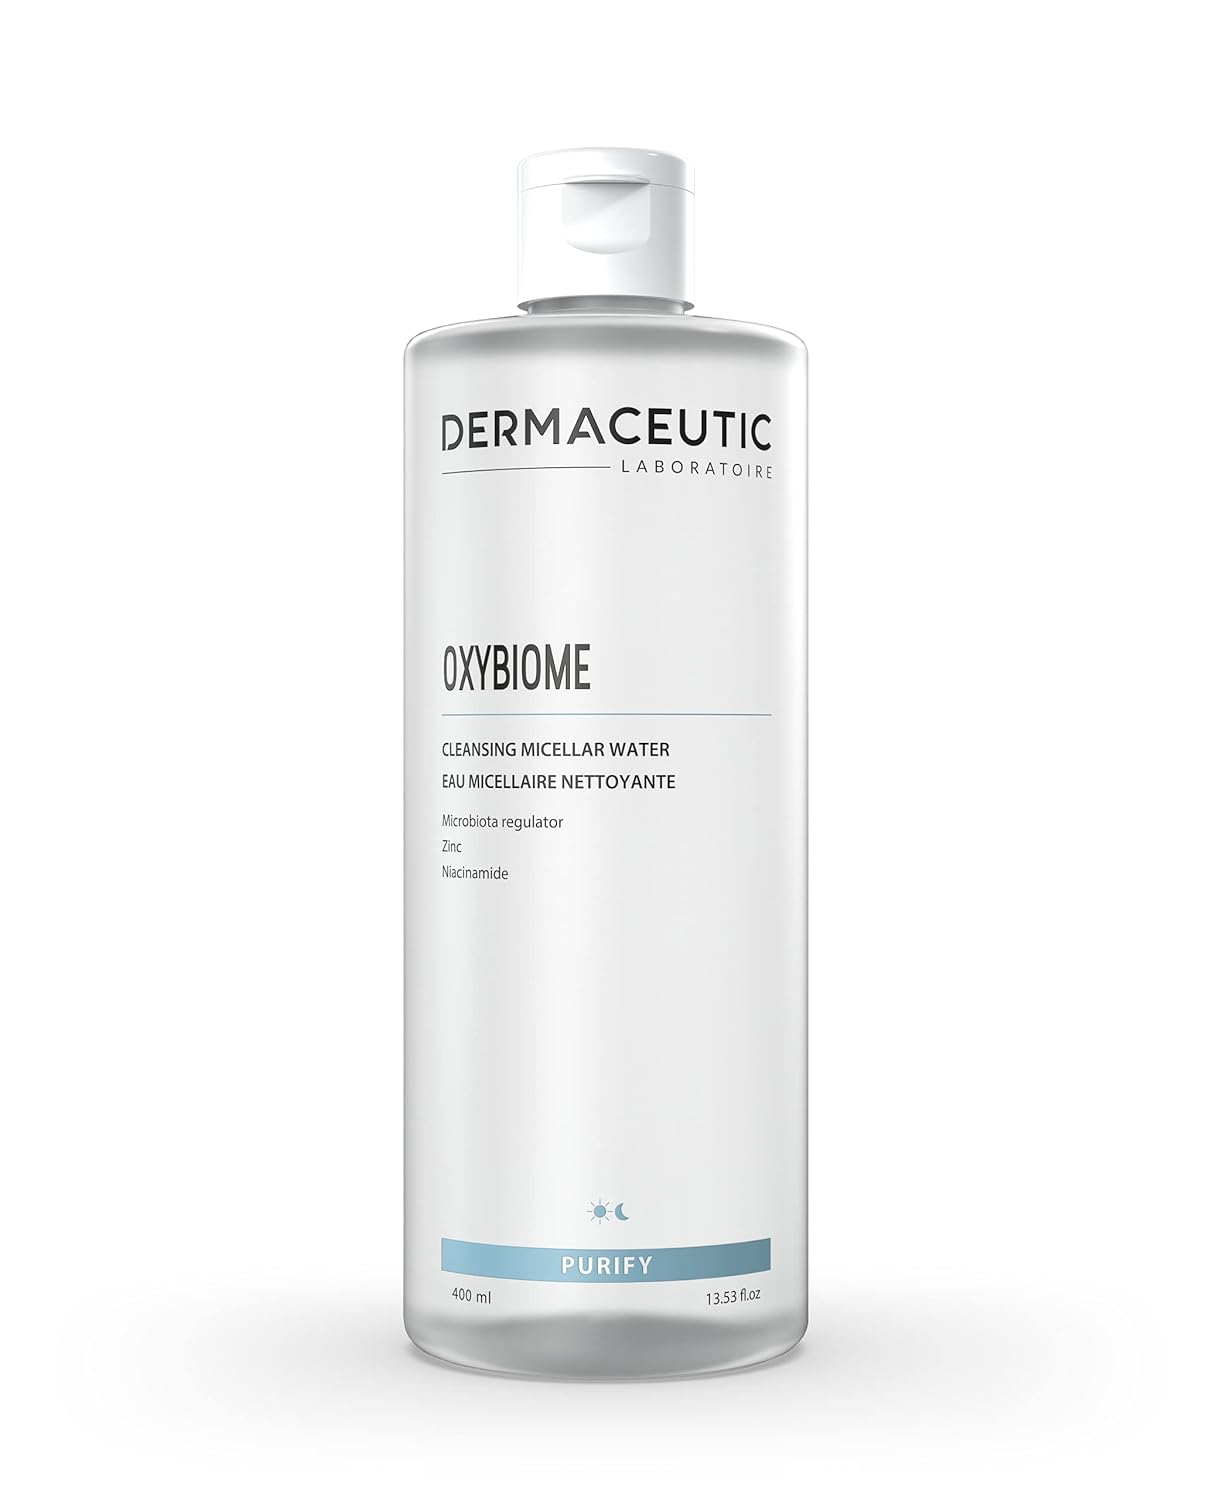 Dermaceutic Oxybiome - Cleansing Micellar Water with Skin Microbiome Regulator, Zinc Gluconate and Niacinamide - 400 ml